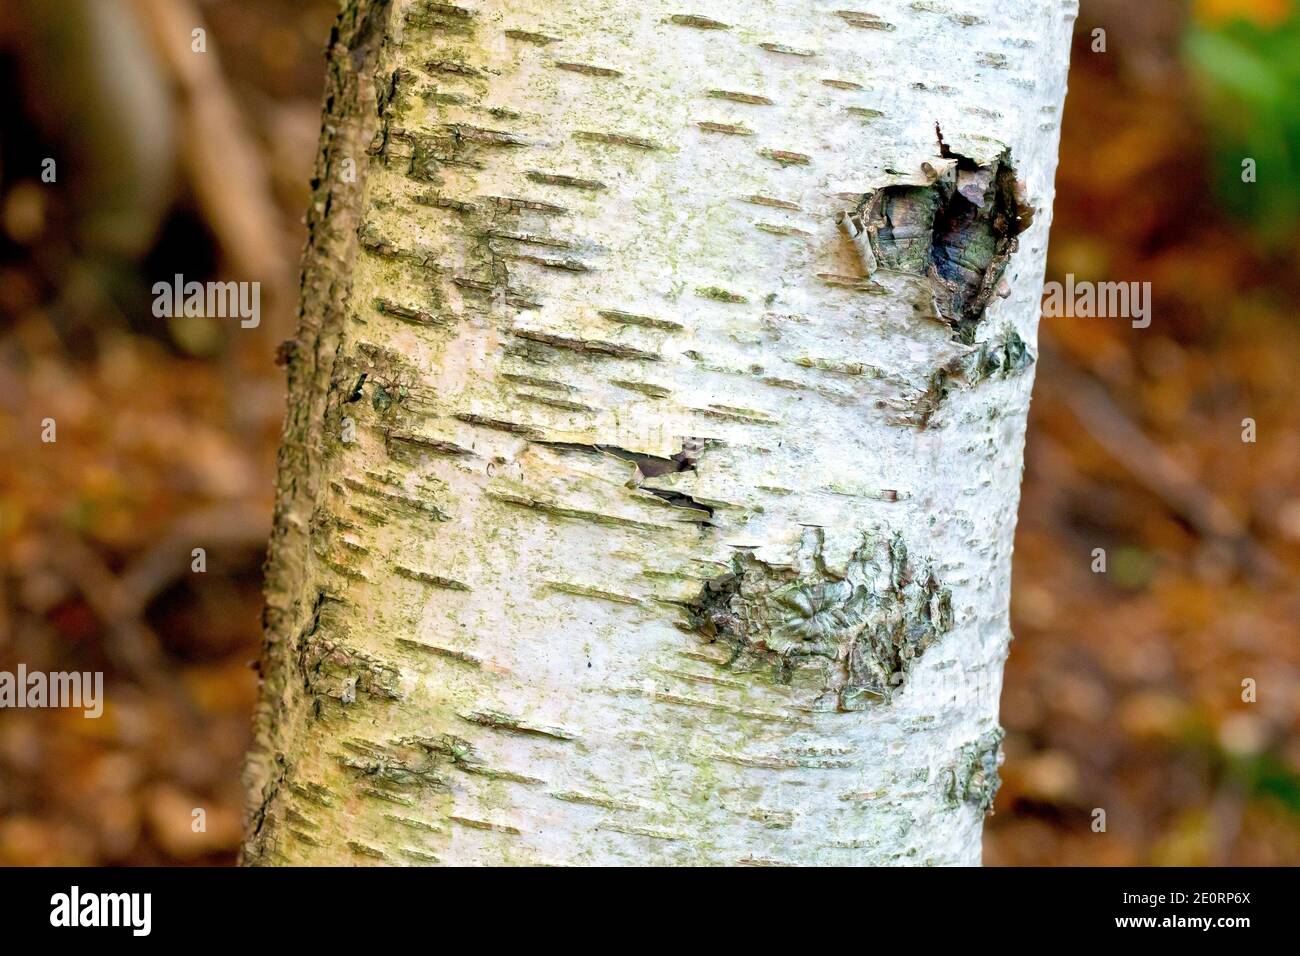 Close up of the bark of a young Silver Birch tree (betula pendula), showing the smooth white texture of its surface. Stock Photo